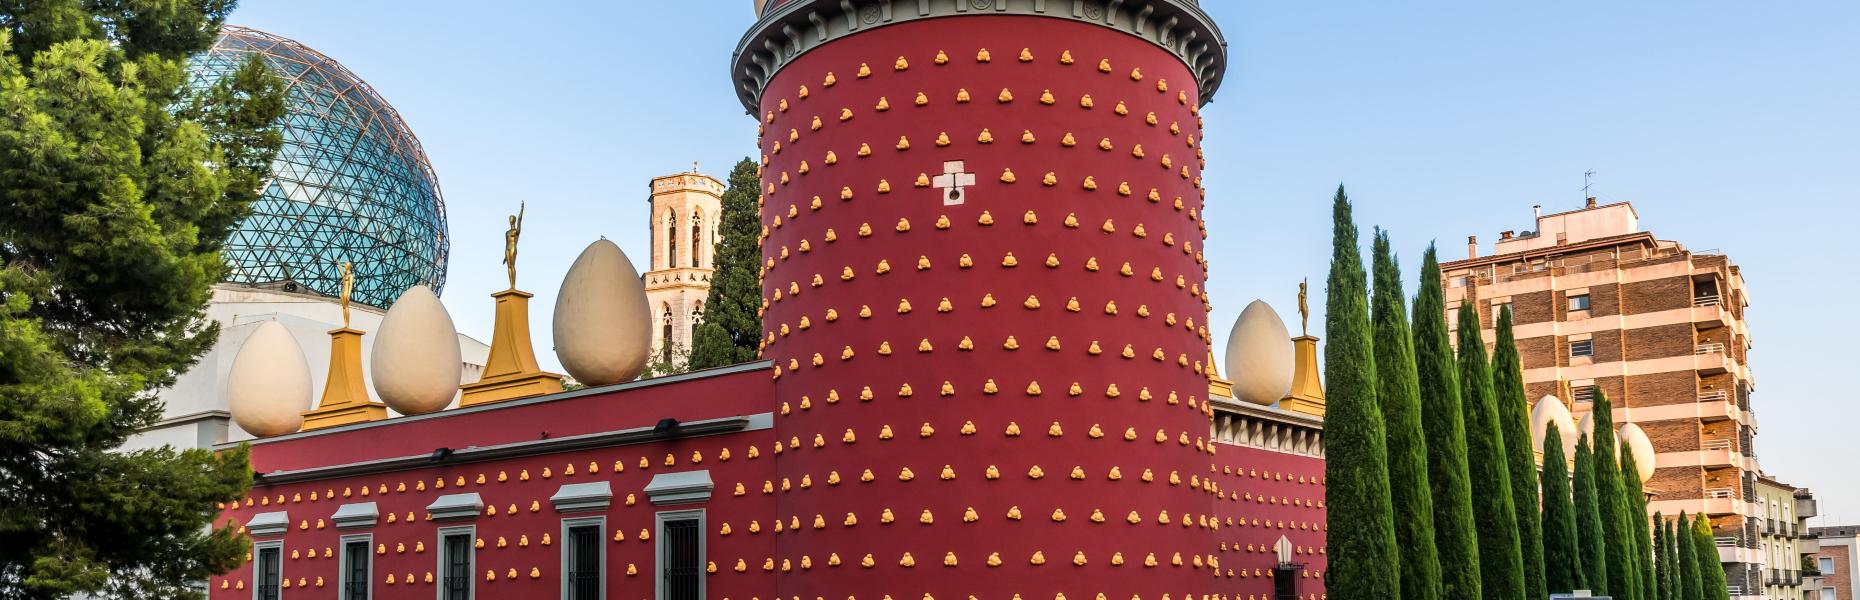 Culture, history, museums and art in the Costa Brava